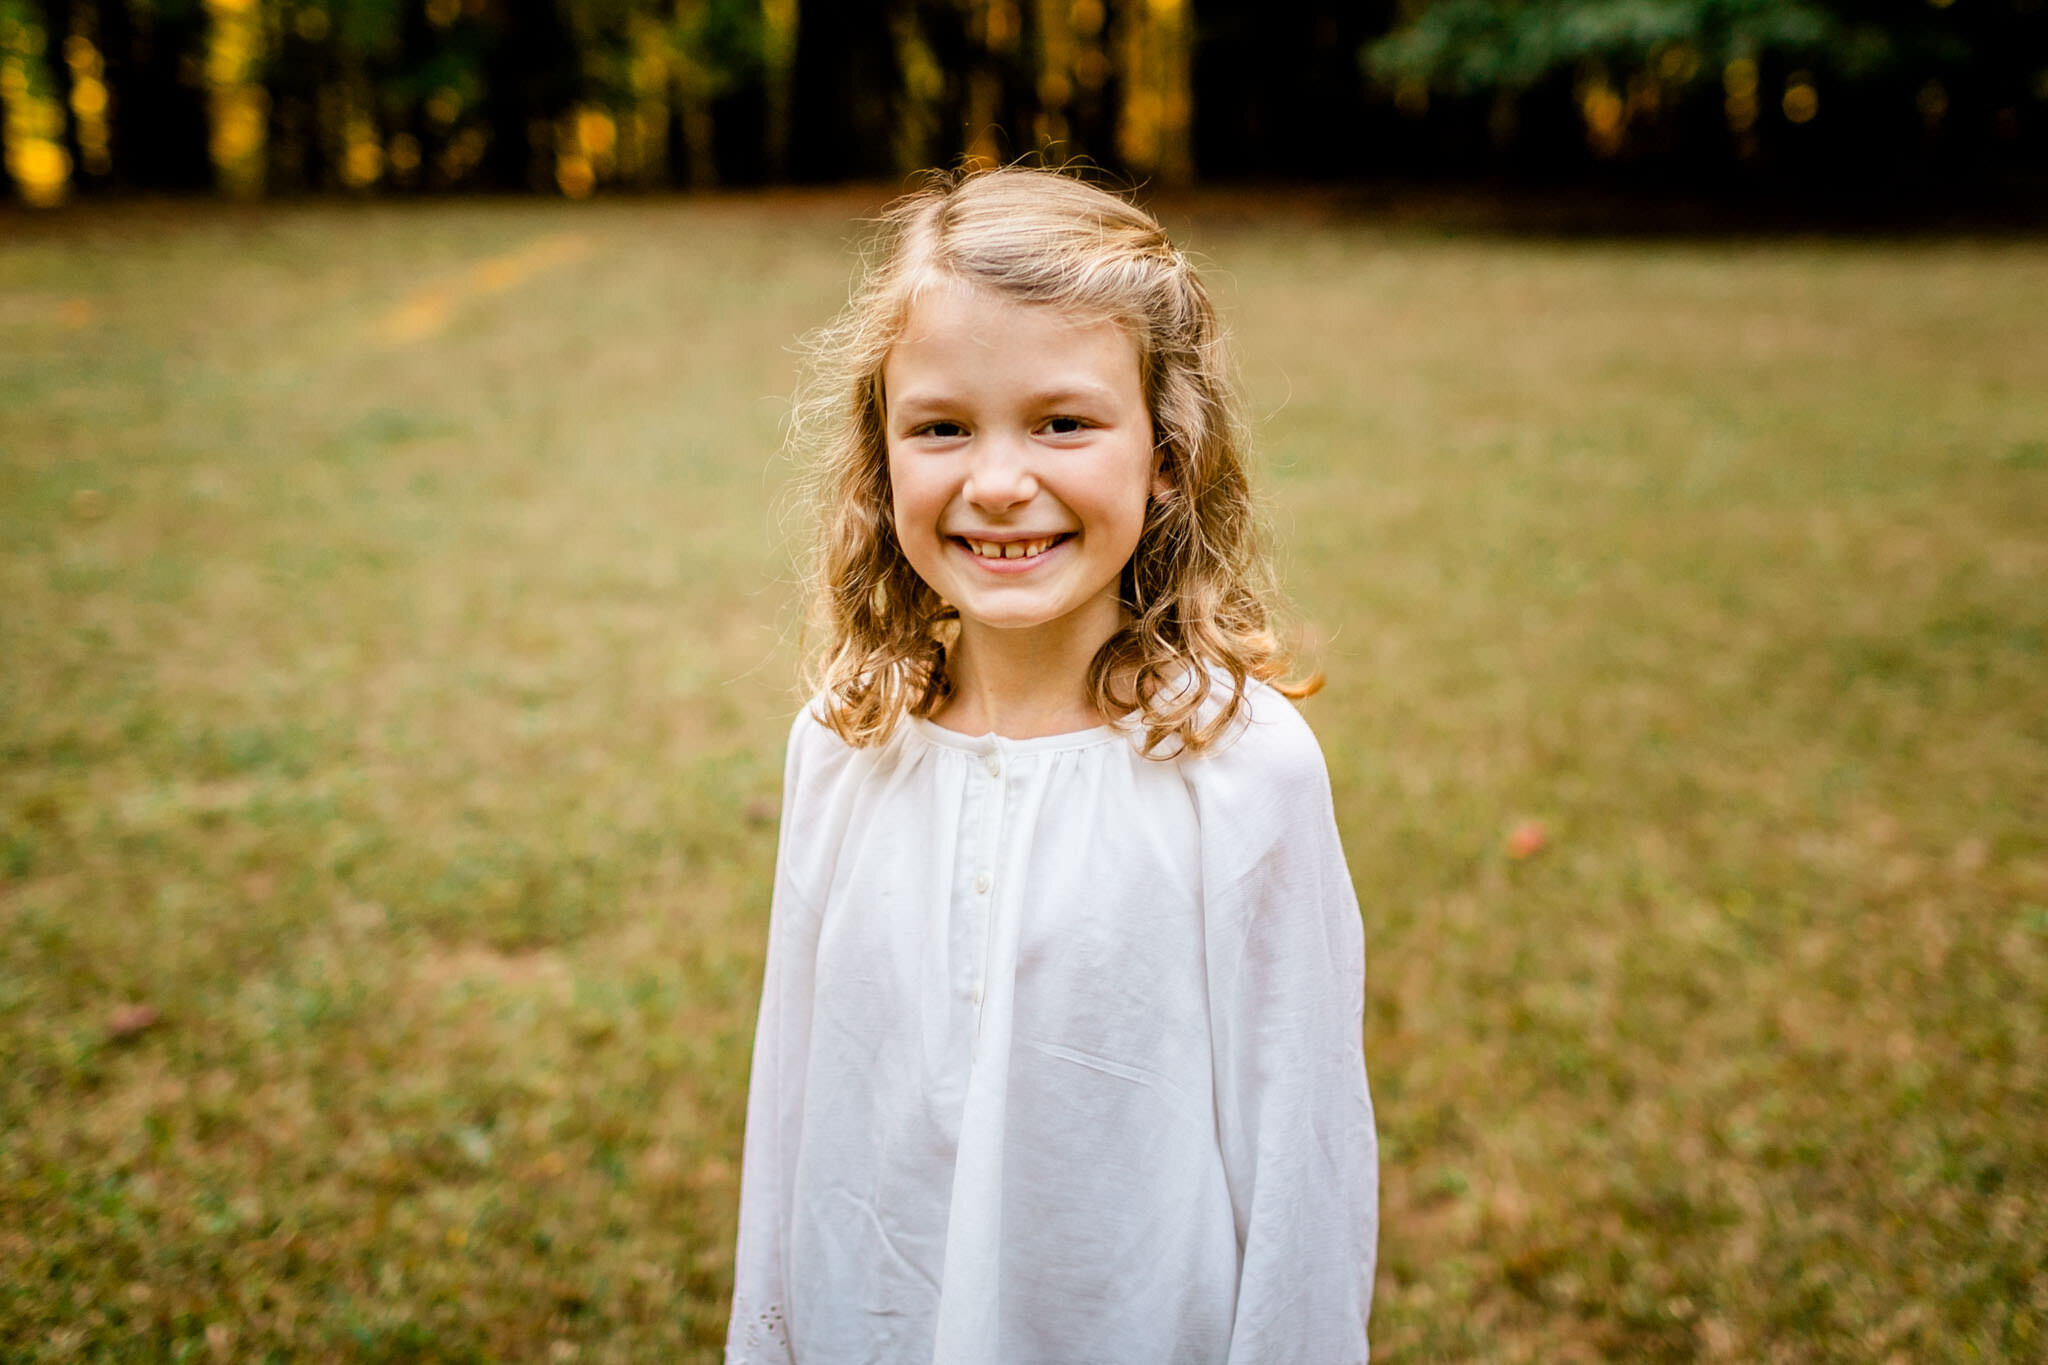 Raleigh Family Photographer | Umstead Park | By G. Lin Photography | Portrait of young girl smiling at camera